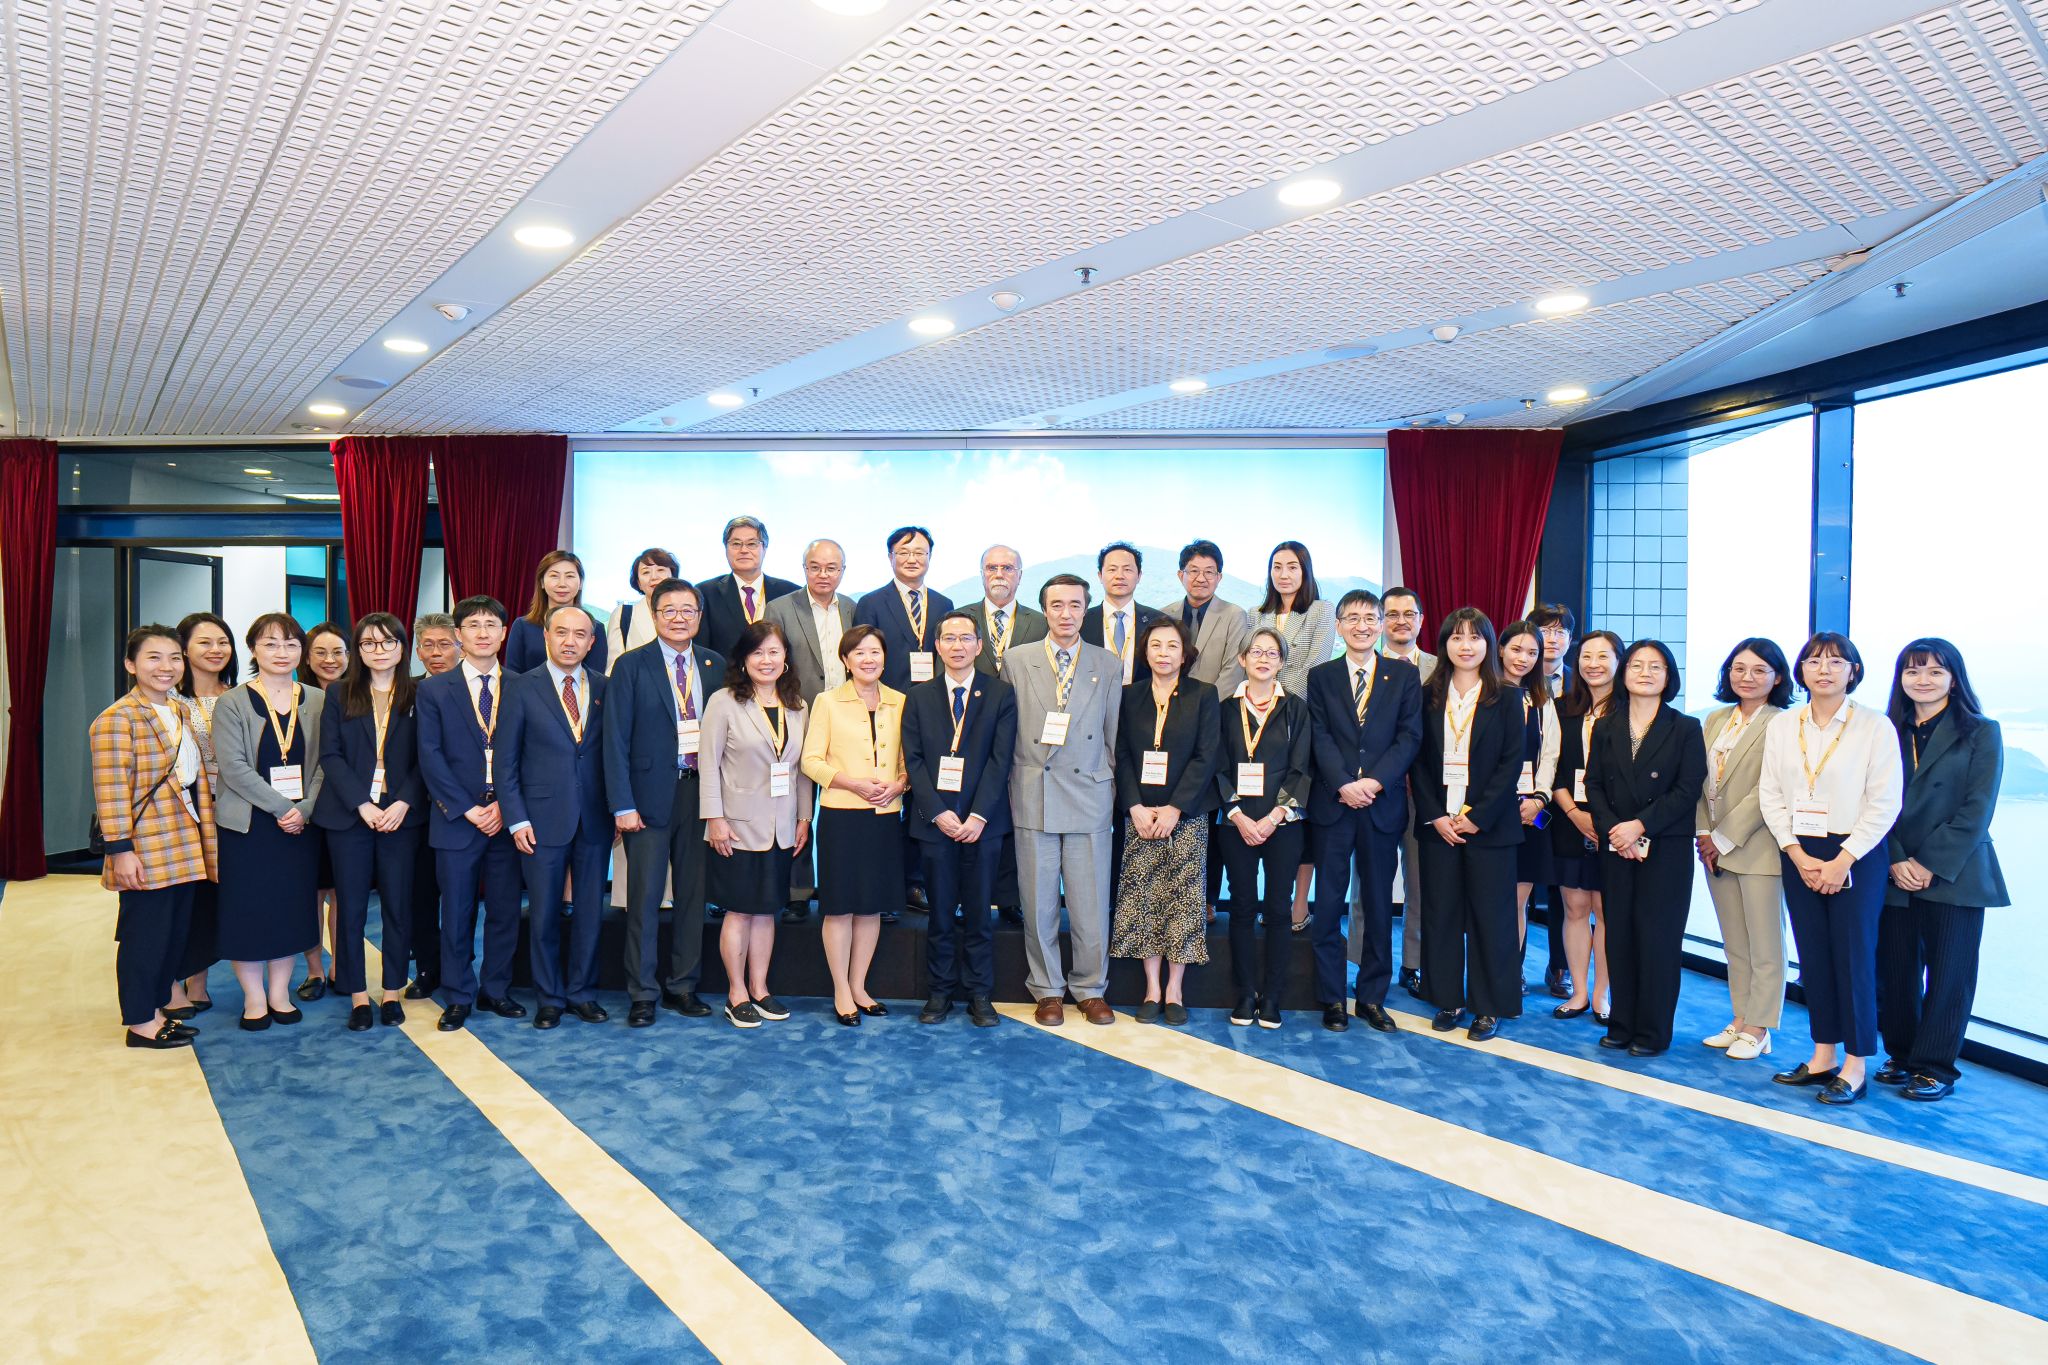 Group photo of members of the Association of East Asian Research Universities (AEARU).